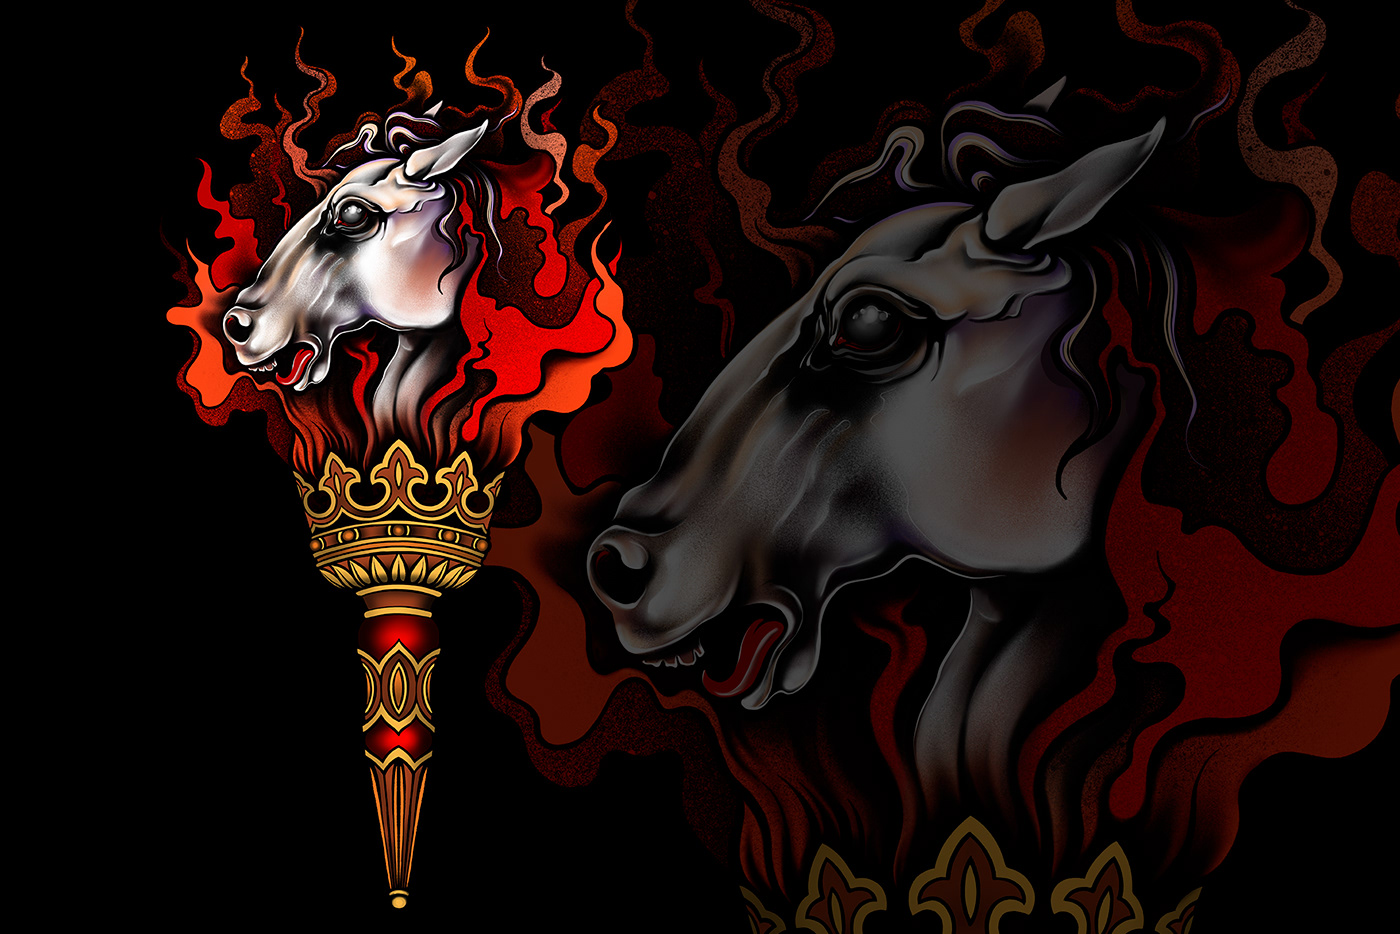 horse torch tattoo traditional t-shirt